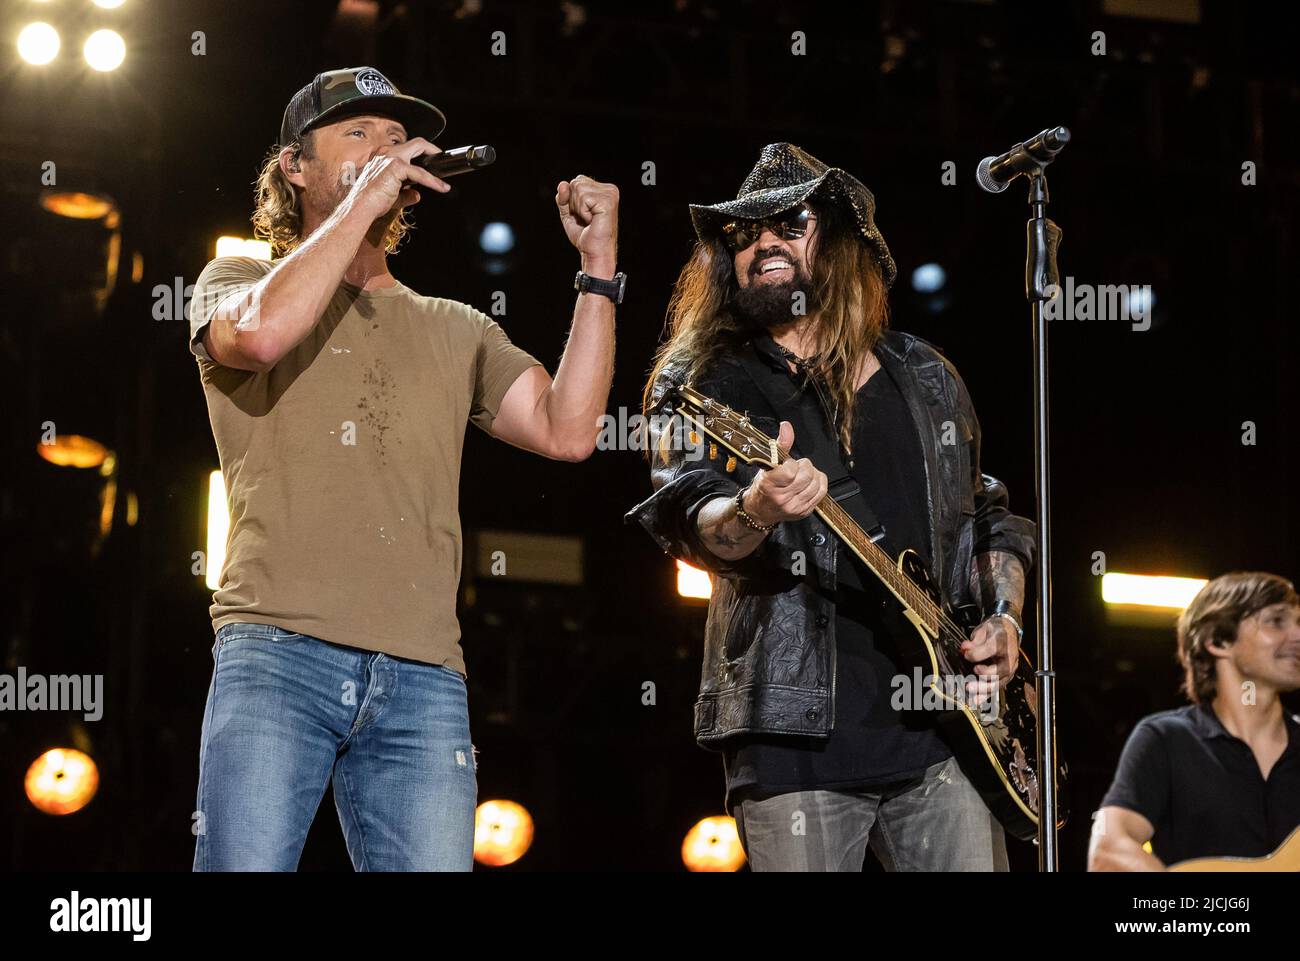 Nashville, USA. 12th June, 2022. Dierks Bentley and Billy Ray Cyrus perform during day 4 of the 2022 CMA FEST at Nissan Stadium on June 12, 2022 in Nashville, Tennessee. Photo: Amiee Stubbs/ImageSPACE/Sipa USA Credit: Sipa USA/Alamy Live News Stock Photo